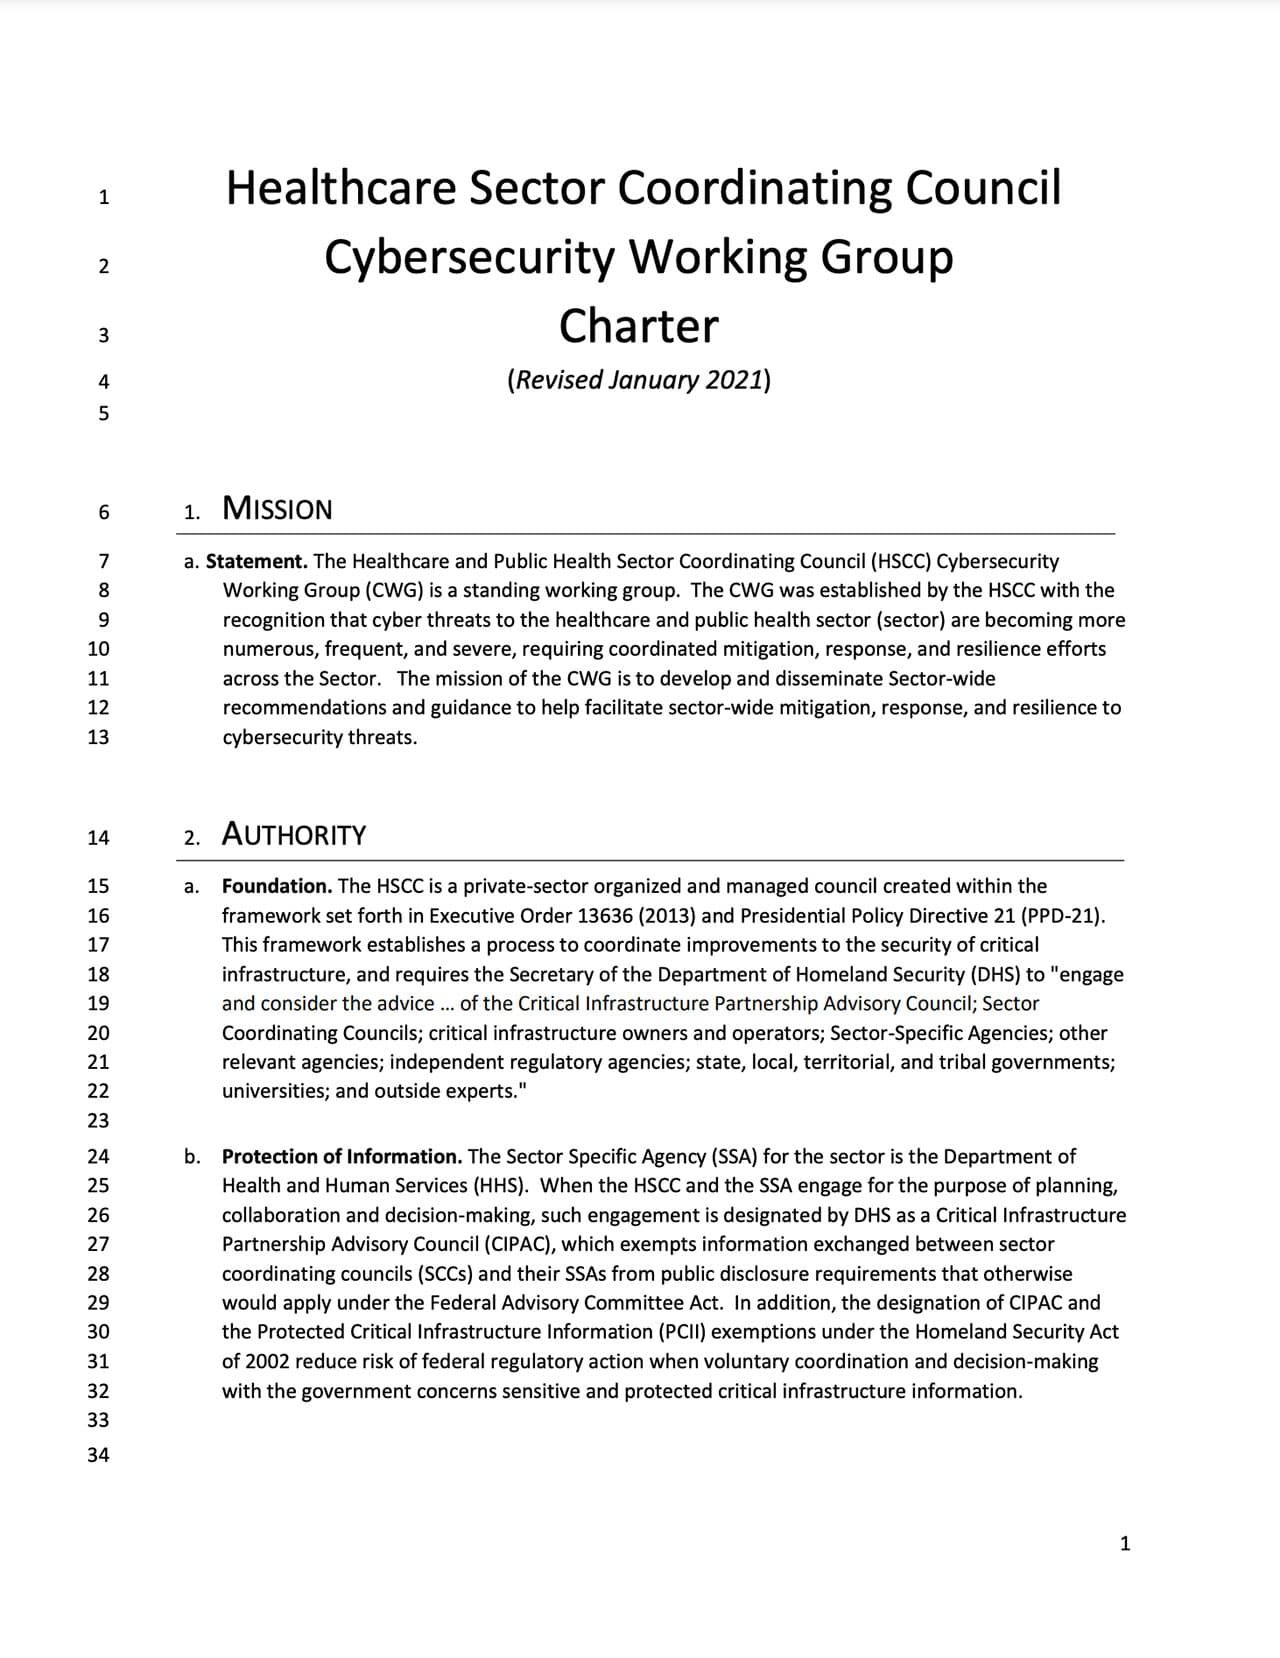 HSCC Cybersecurity Working Group Charter